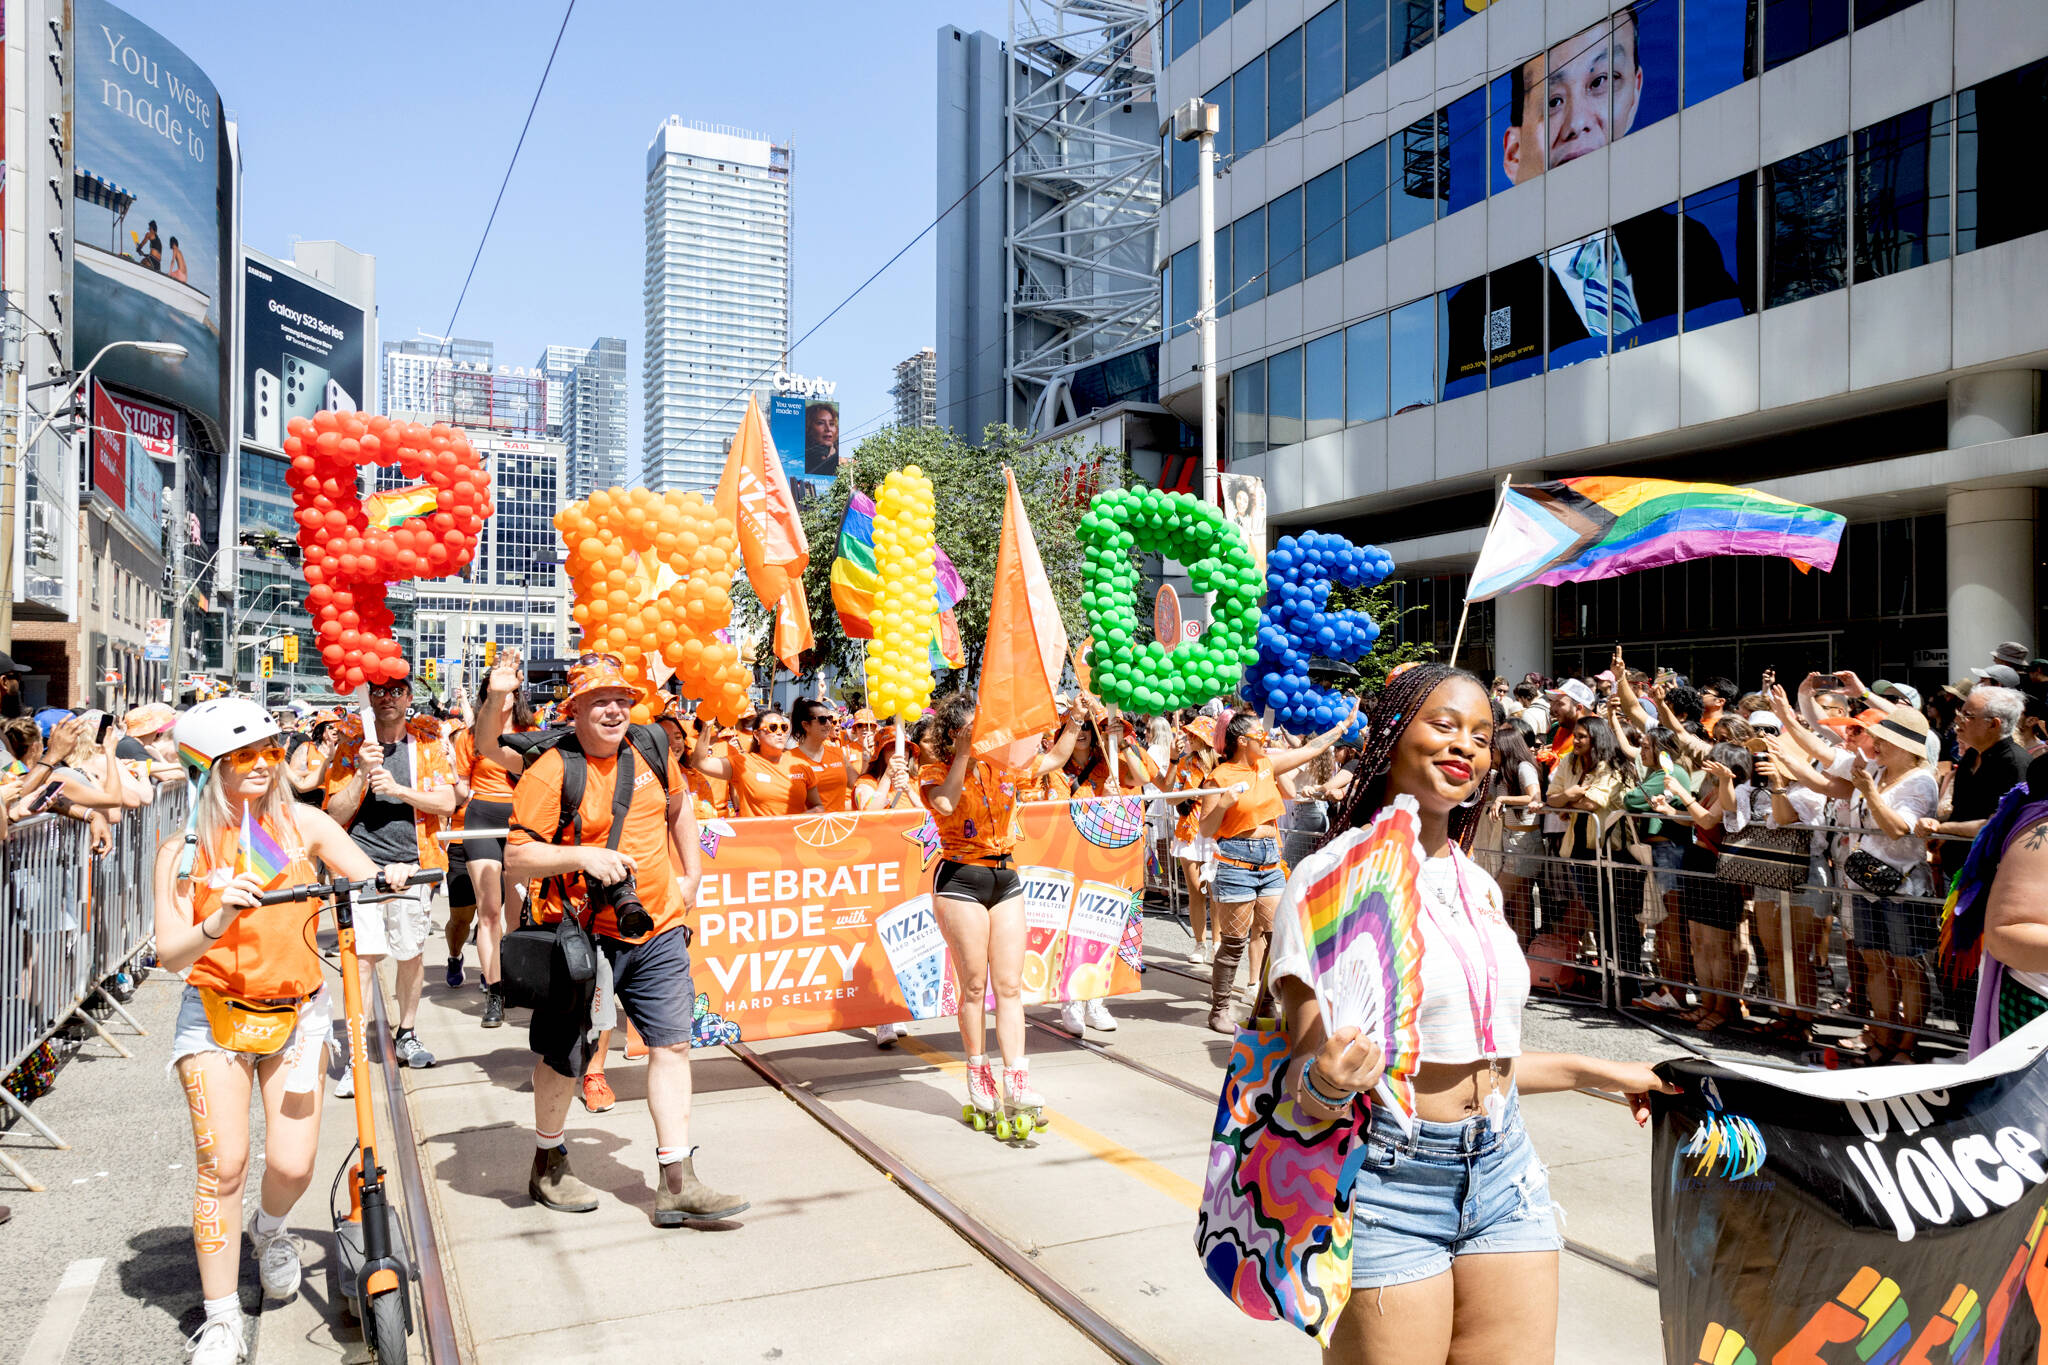 69 photos from the 2023 Pride Parade in Toronto